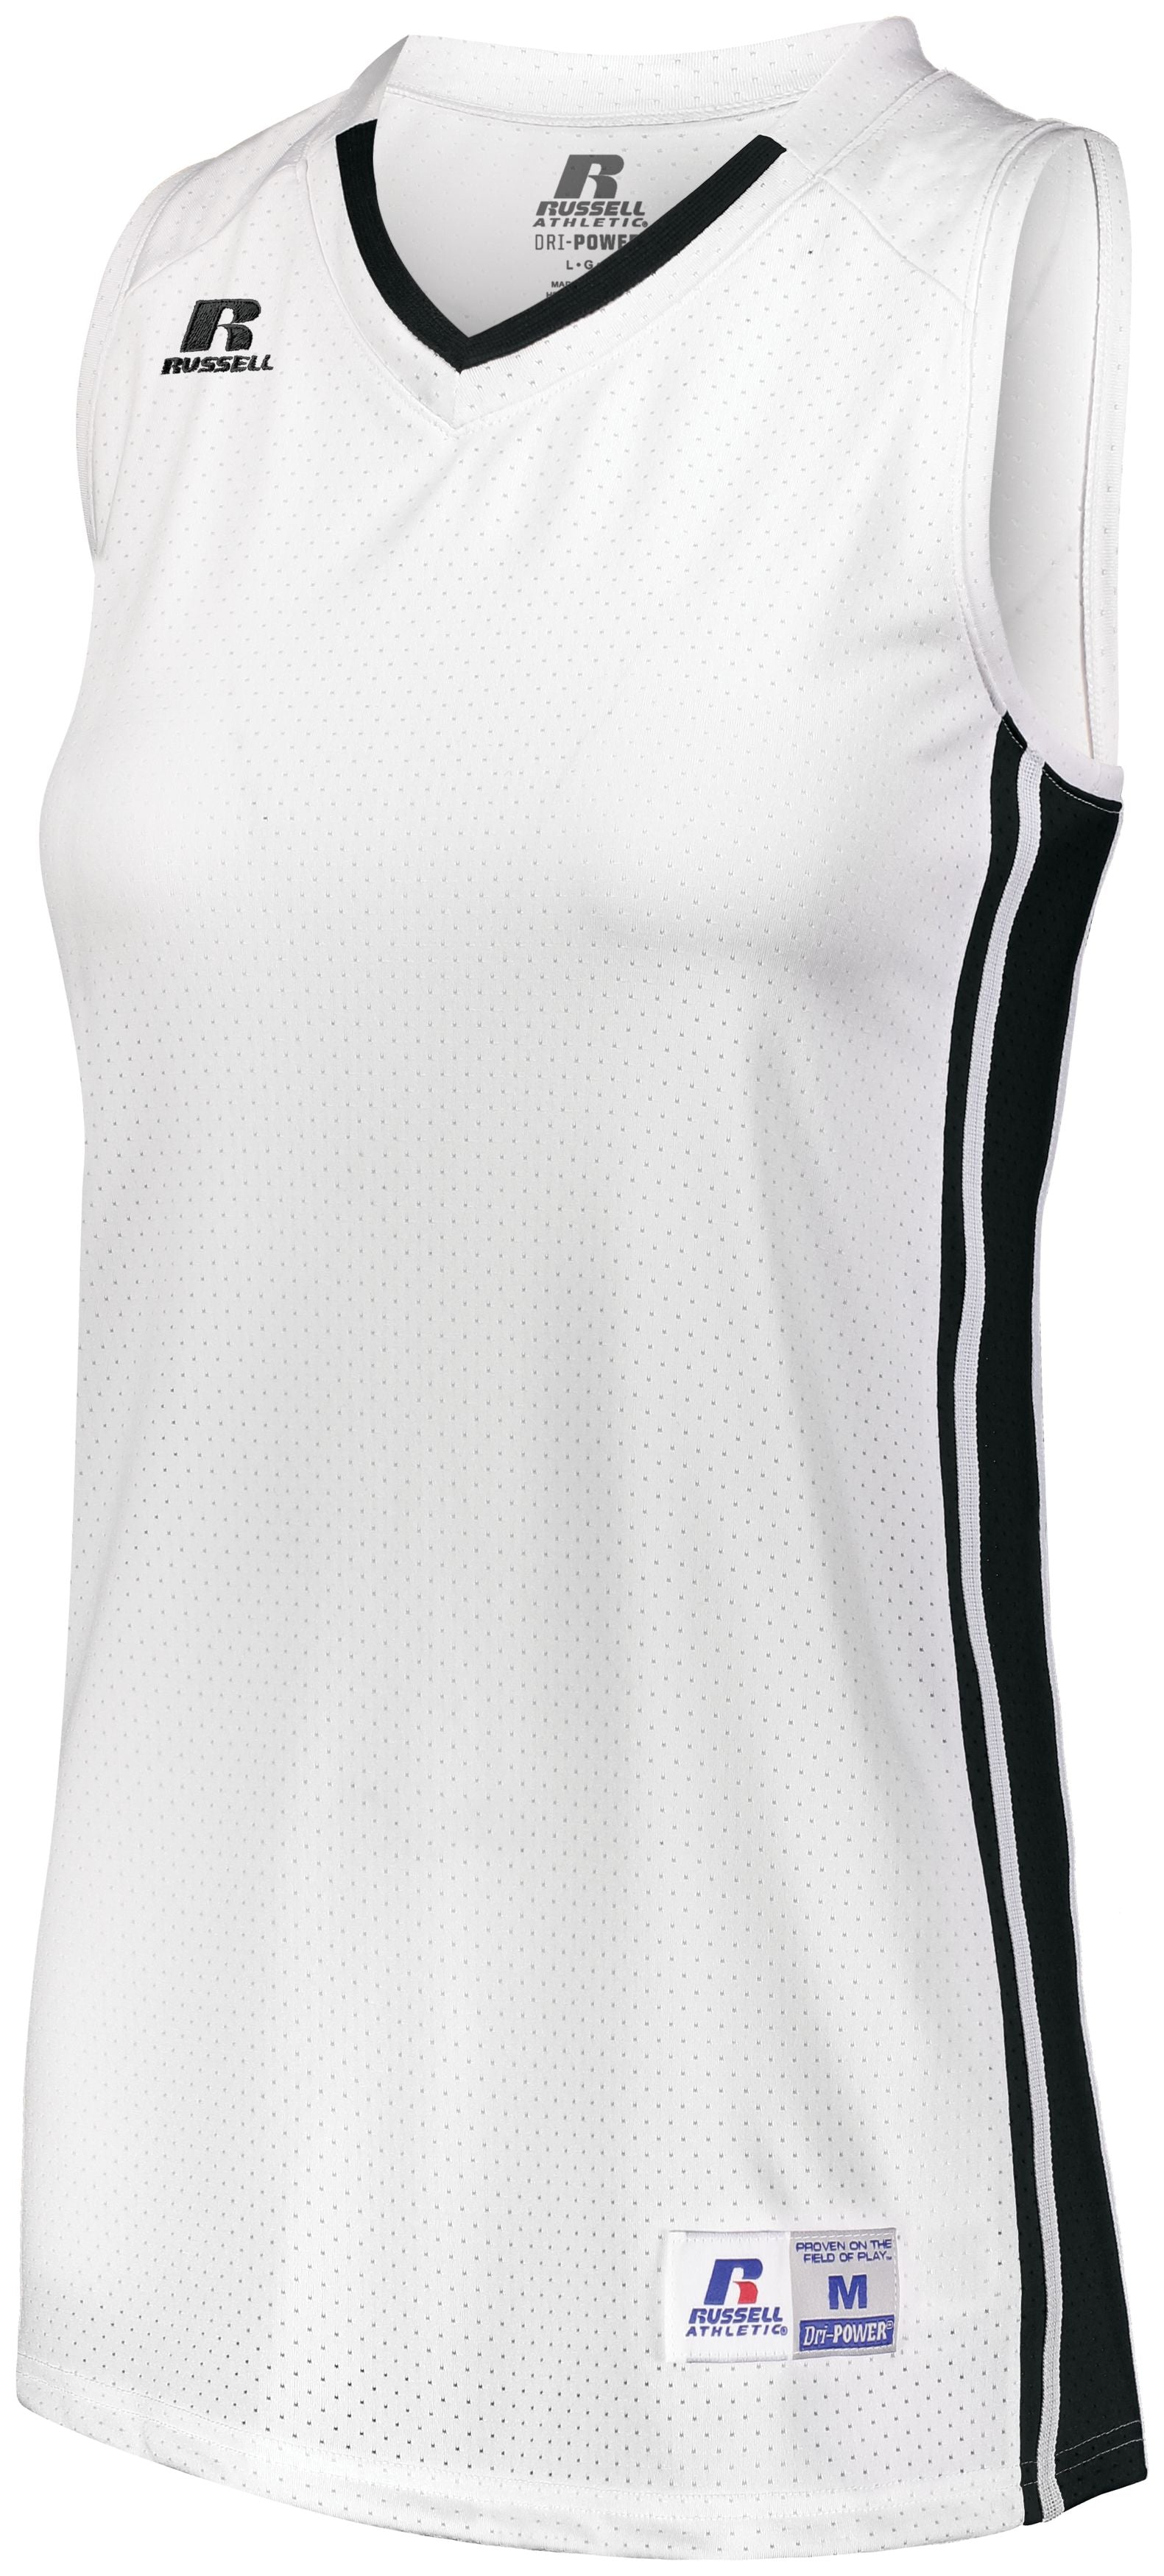 Russell Athletic Ladies Legacy Basketball Jersey in White/Black  -Part of the Ladies, Ladies-Jersey, Basketball, Russell-Athletic-Products, Shirts, All-Sports, All-Sports-1 product lines at KanaleyCreations.com